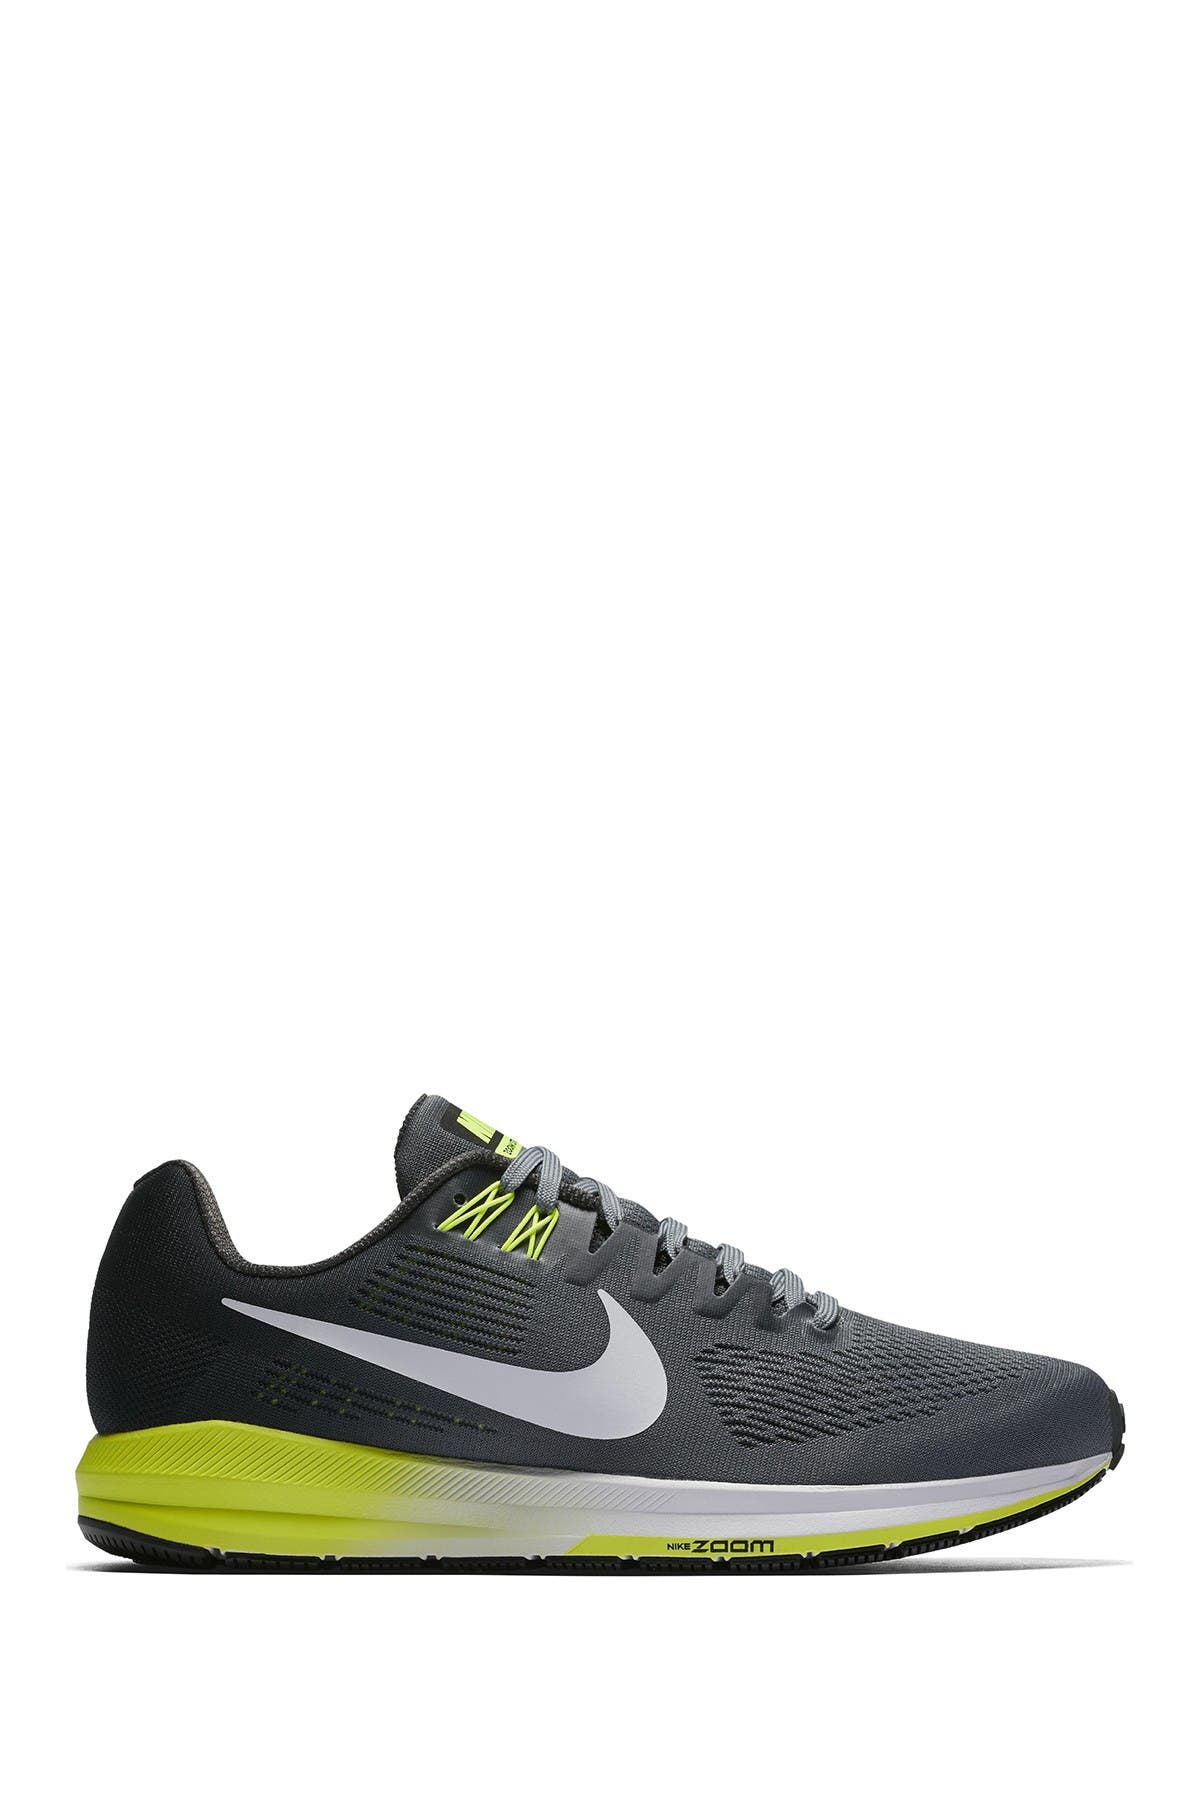 nike dynamic fit zoom structure 21